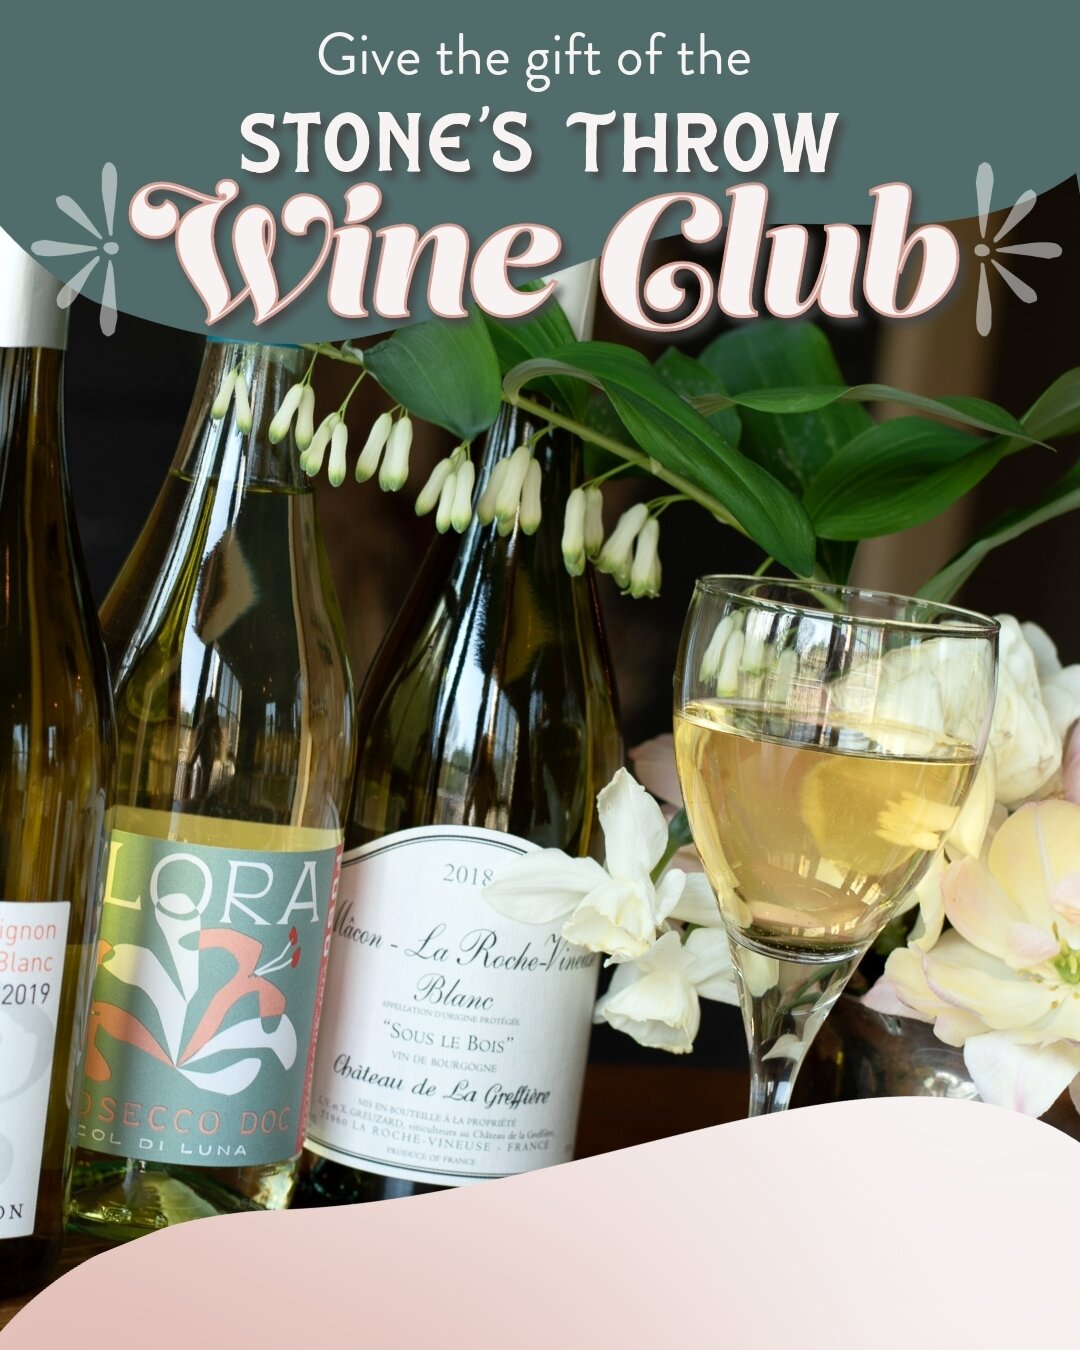 At a loss for what to get your loved one this V-Day? We got you! 
Gift a Stone's Throw Wine Club membership! It&rsquo;s quick and easy to sign up on our website and you can opt for monthly indulgence or seize the opportunity to SAVE by committing to 